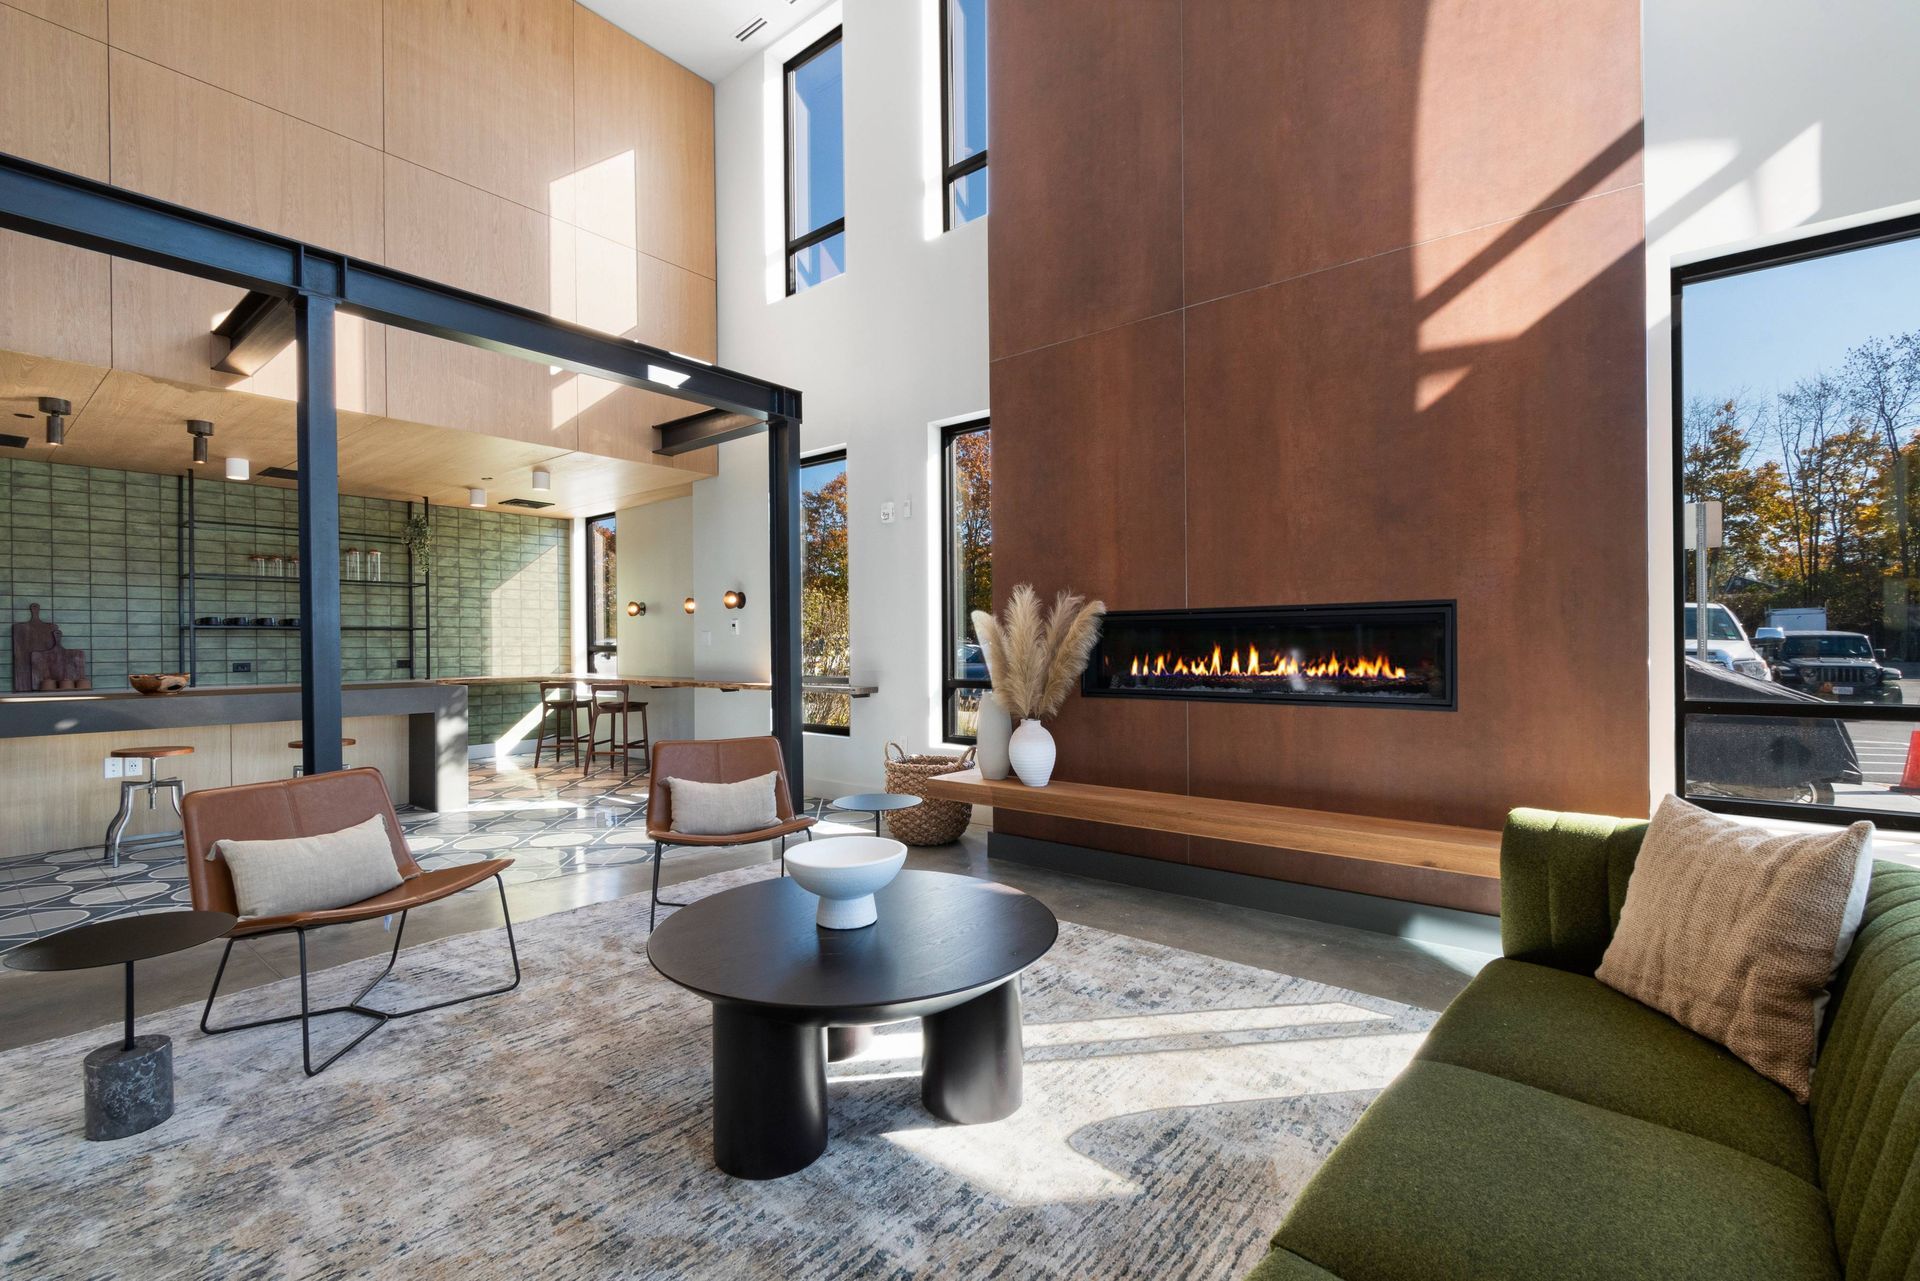 West End Yards apartment clubhouse with modern design and digital fire place. 